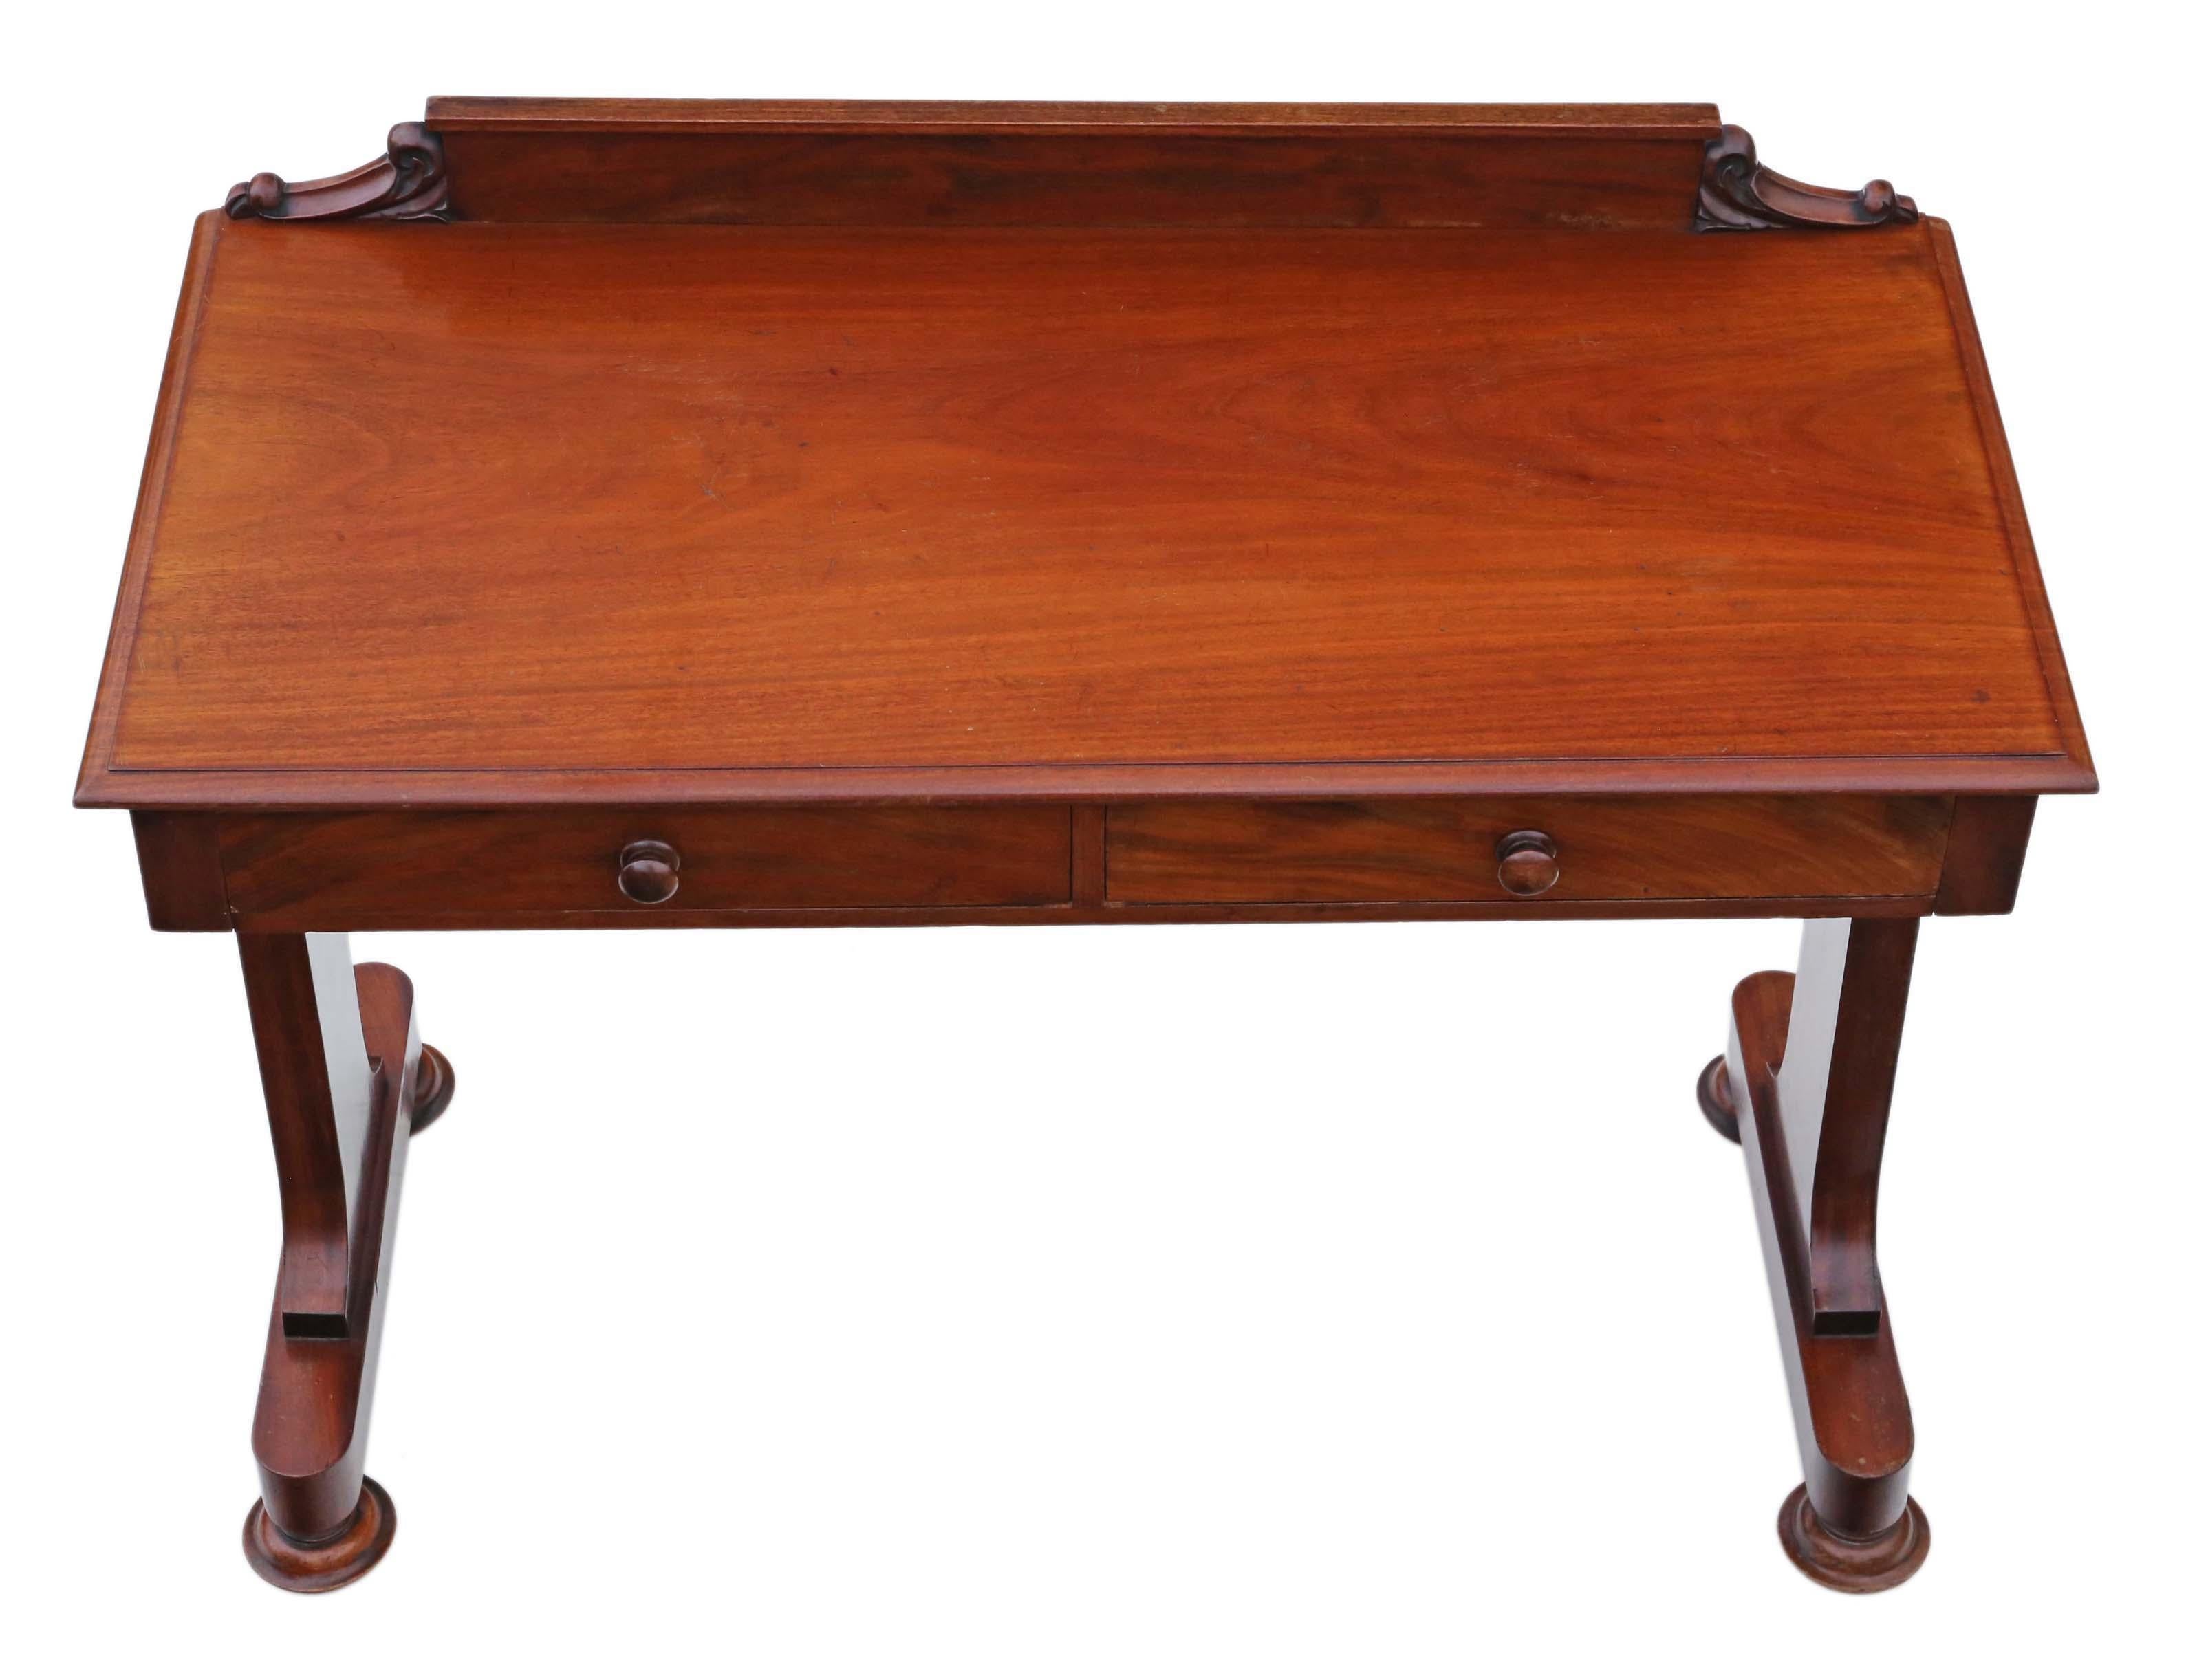 Antique fine quality Victorian 19th century mahogany writing desk dressing table.

Solid and no loose joints and no woodworm. Full of age, character and charm. The ash lined drawers slide freely. A rare and attractive find.

Would look great in